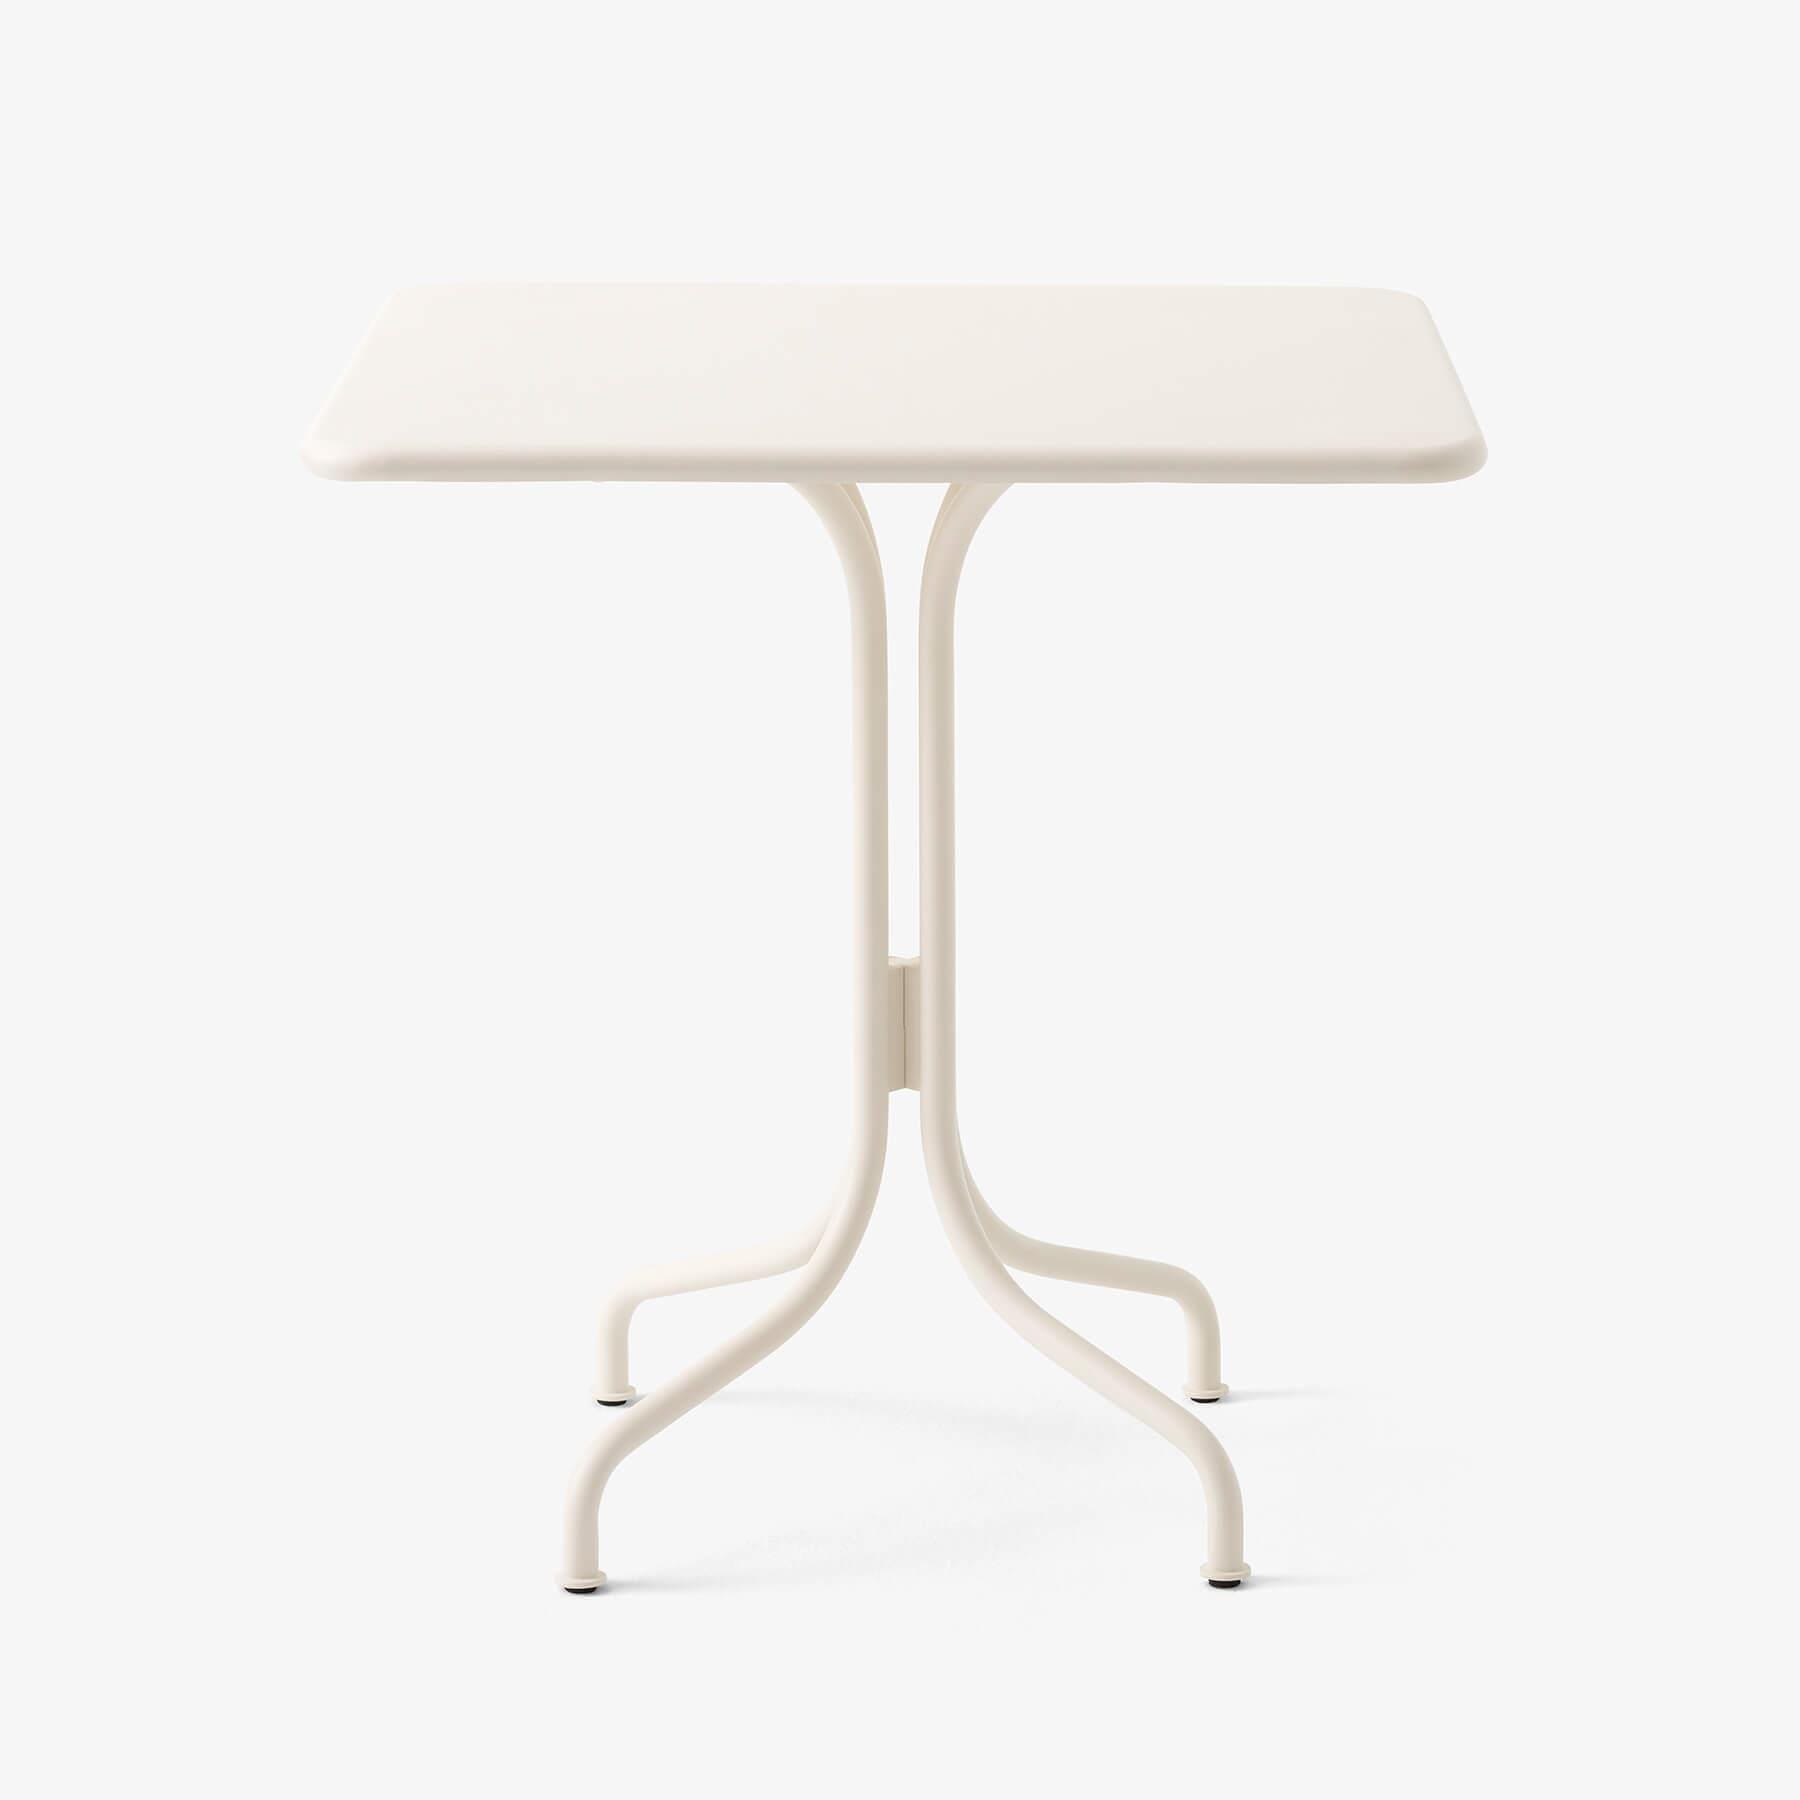 Tradition Sc97 Thorvald Space Copenhagen Outdoor Table Ivory White